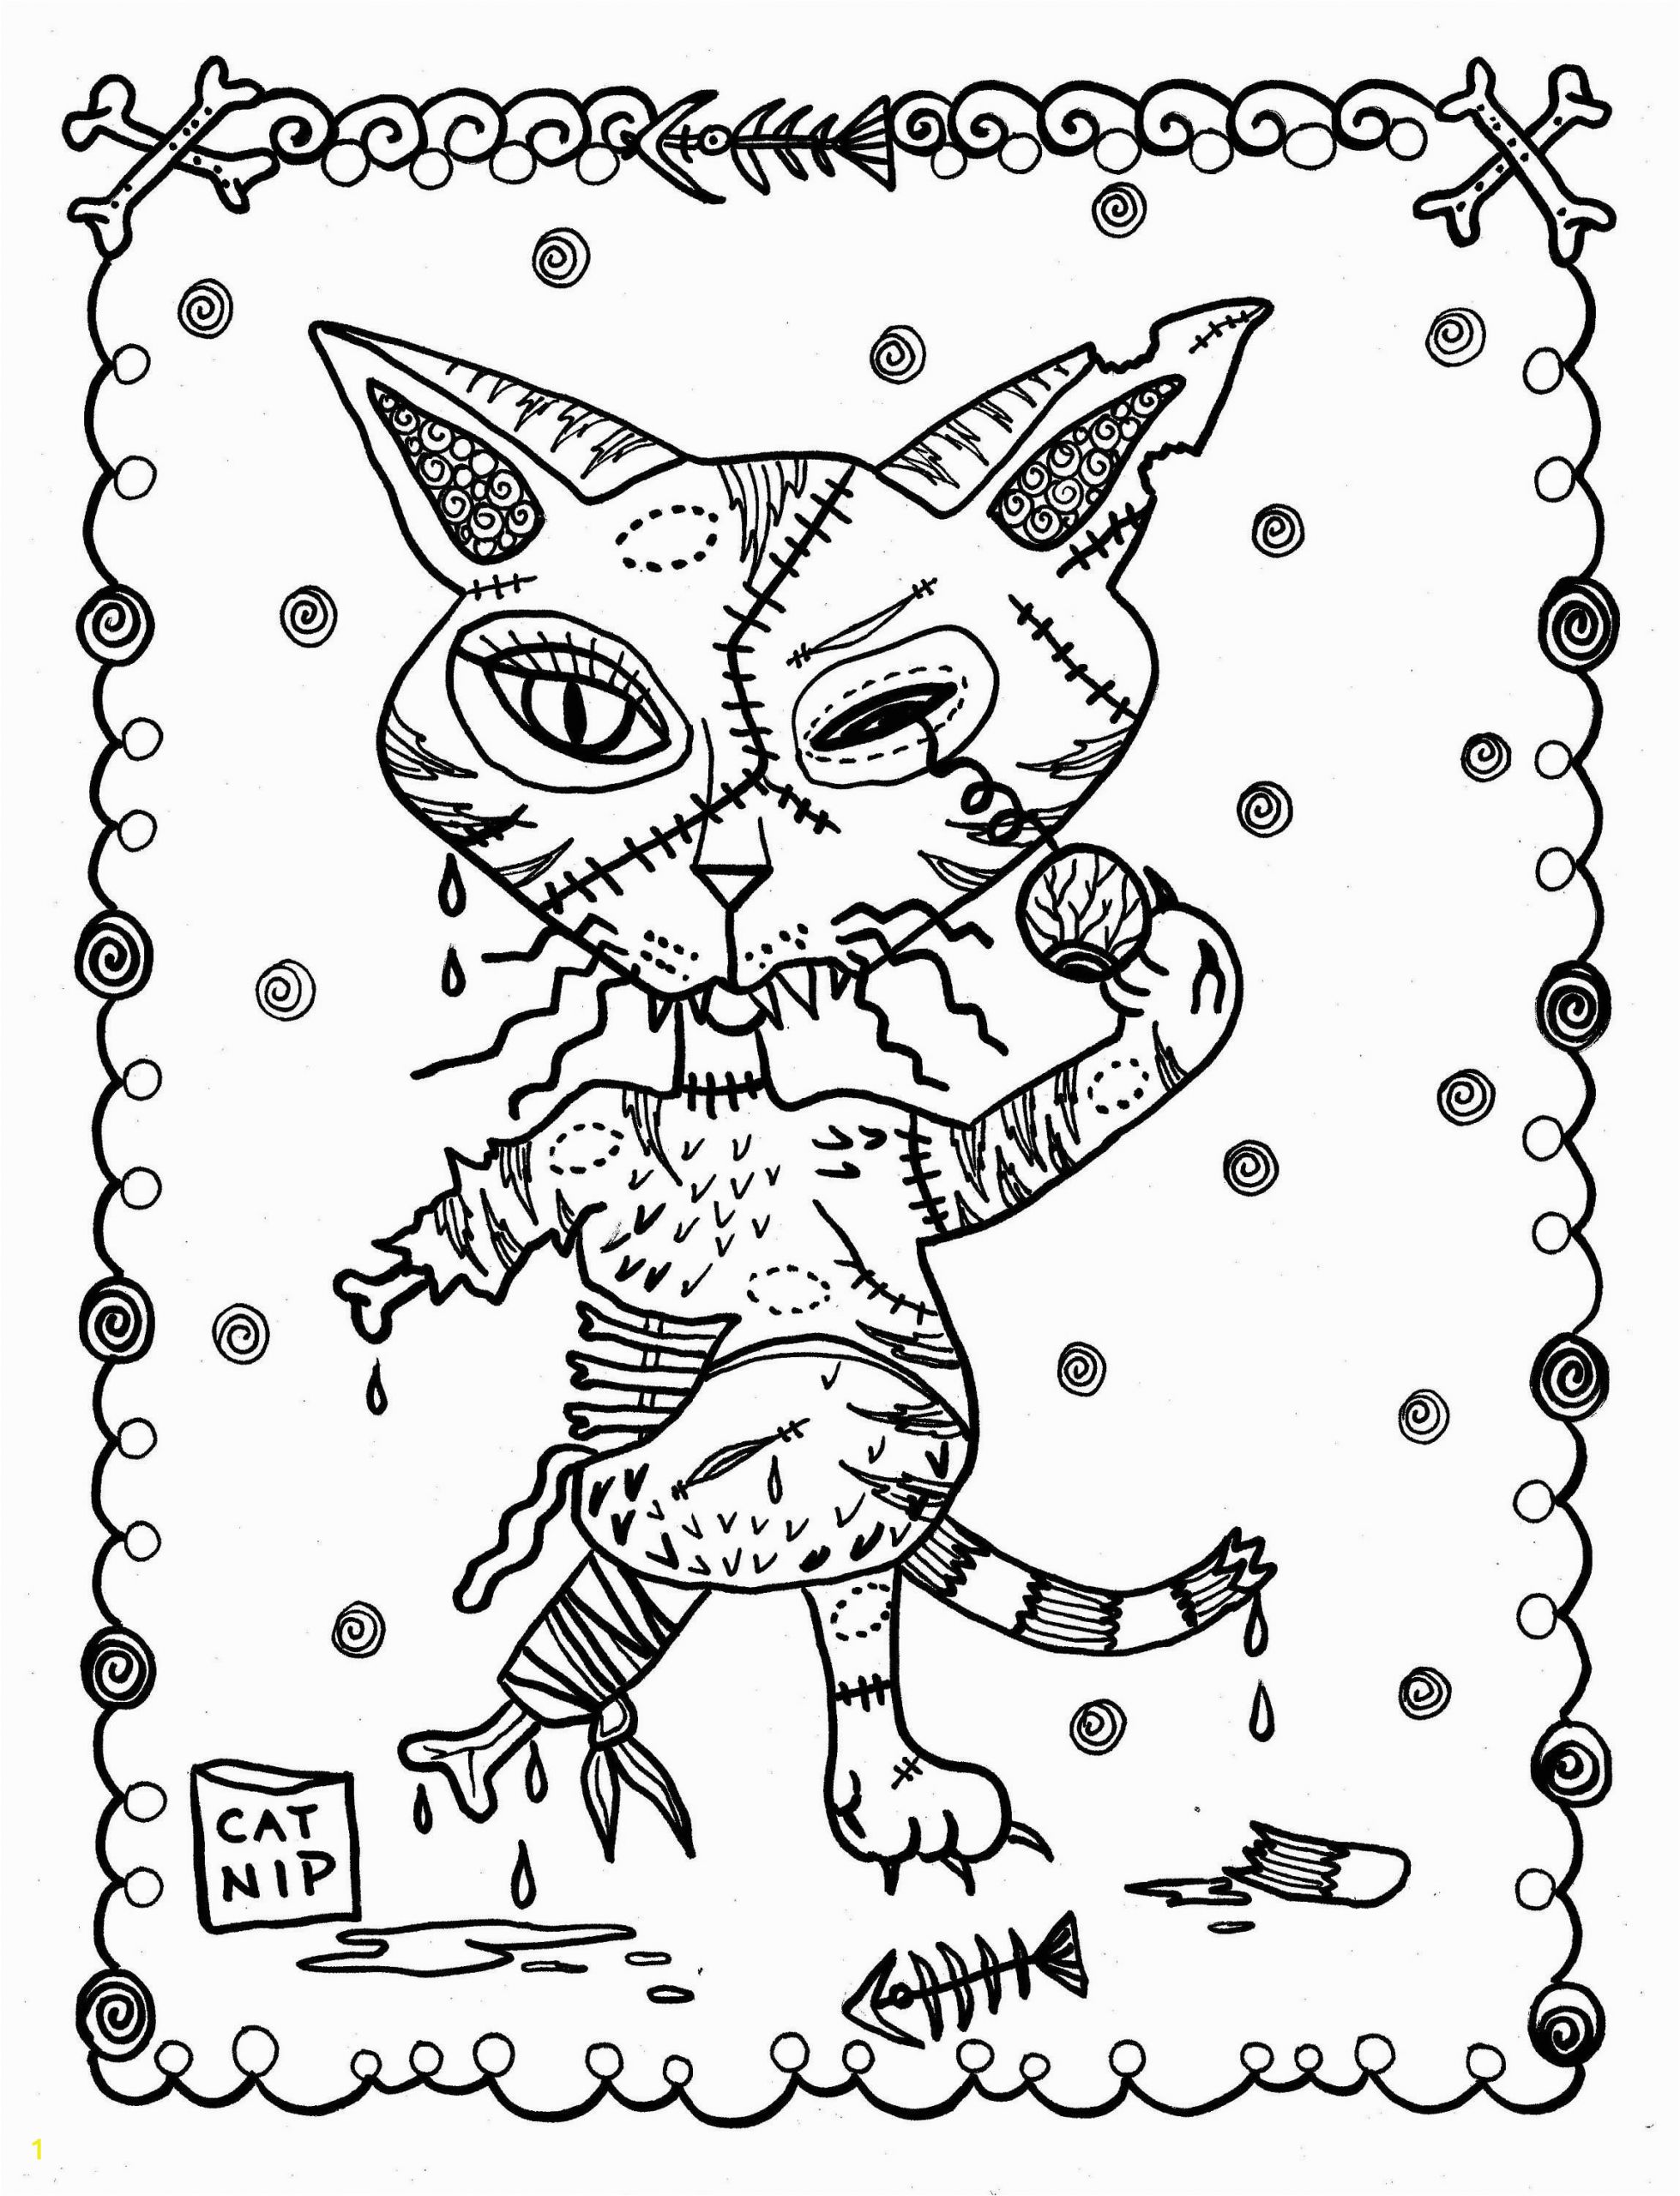 Halloween Frankenstein Coloring Pages 5 Pages Fantasy Cats Instant S Scarry Halloween